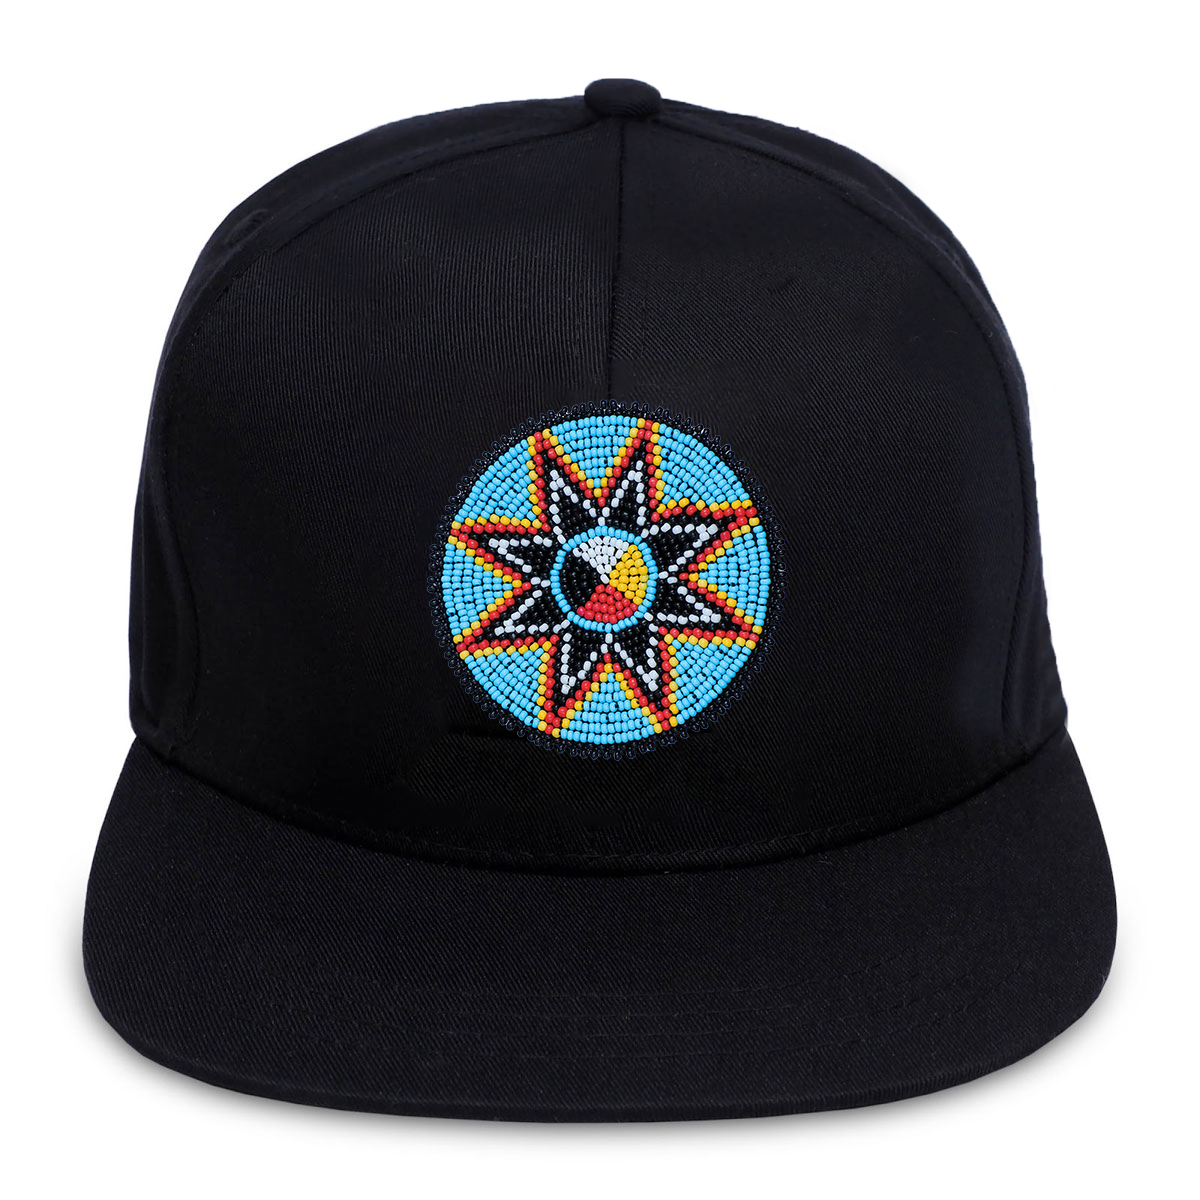 SALE 50% OFF - Medicine Wheel Star Handmade Beaded Snapback With Patch Cotton Cap Unisex Native American Style